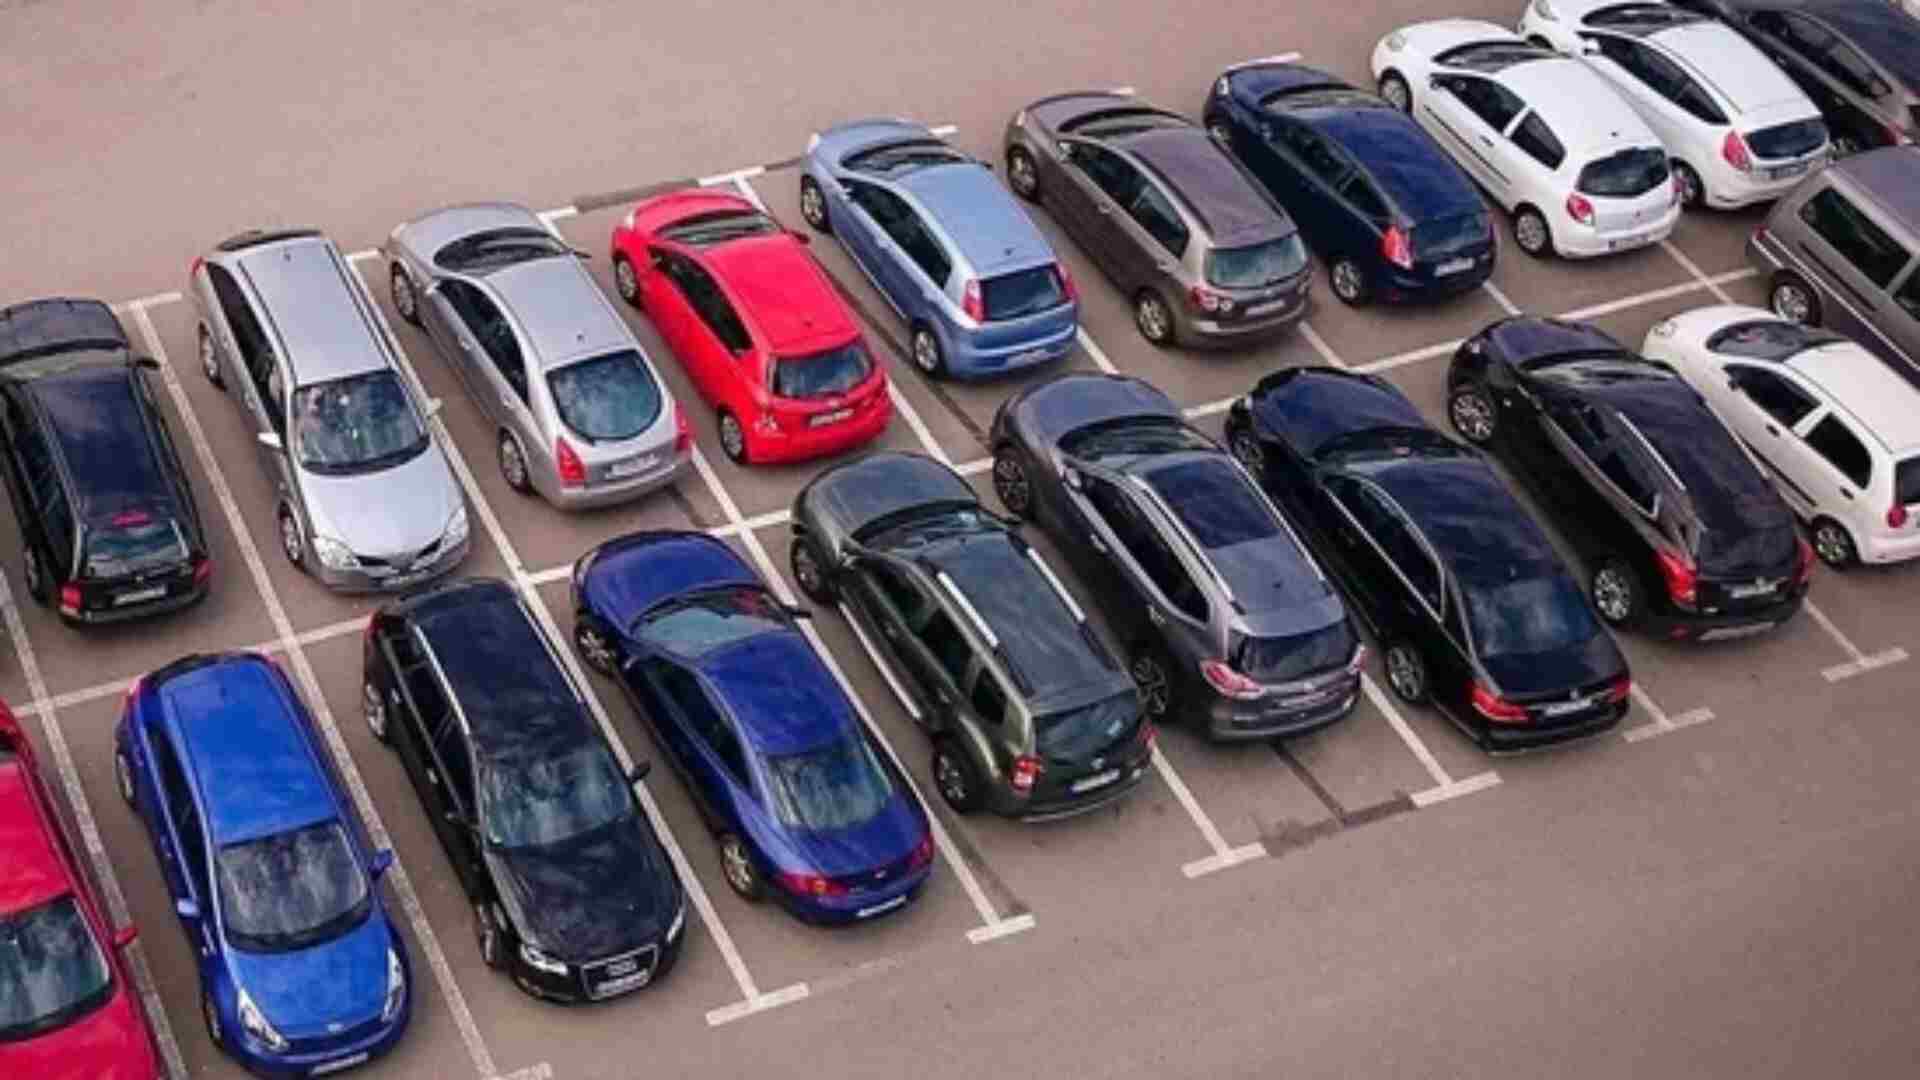 Kerala Government To Launch Mobile App For Reserving Parking Space